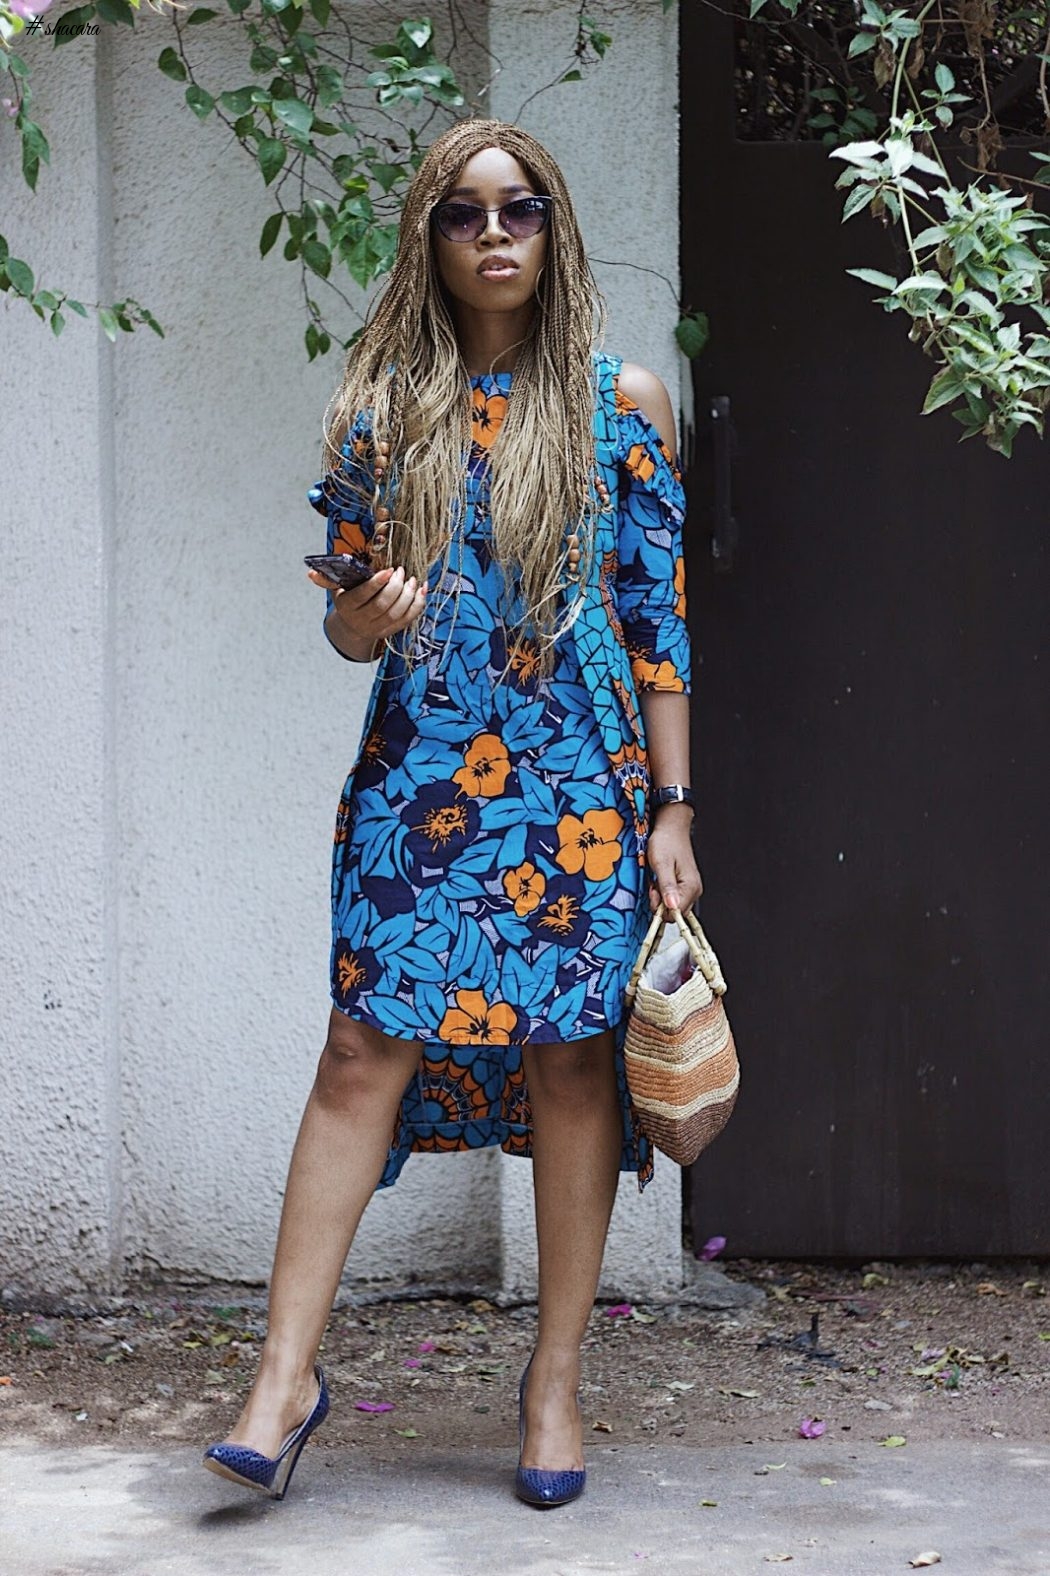 LAZY GIRL ANKARA STYLES FOR THE WEEKEND